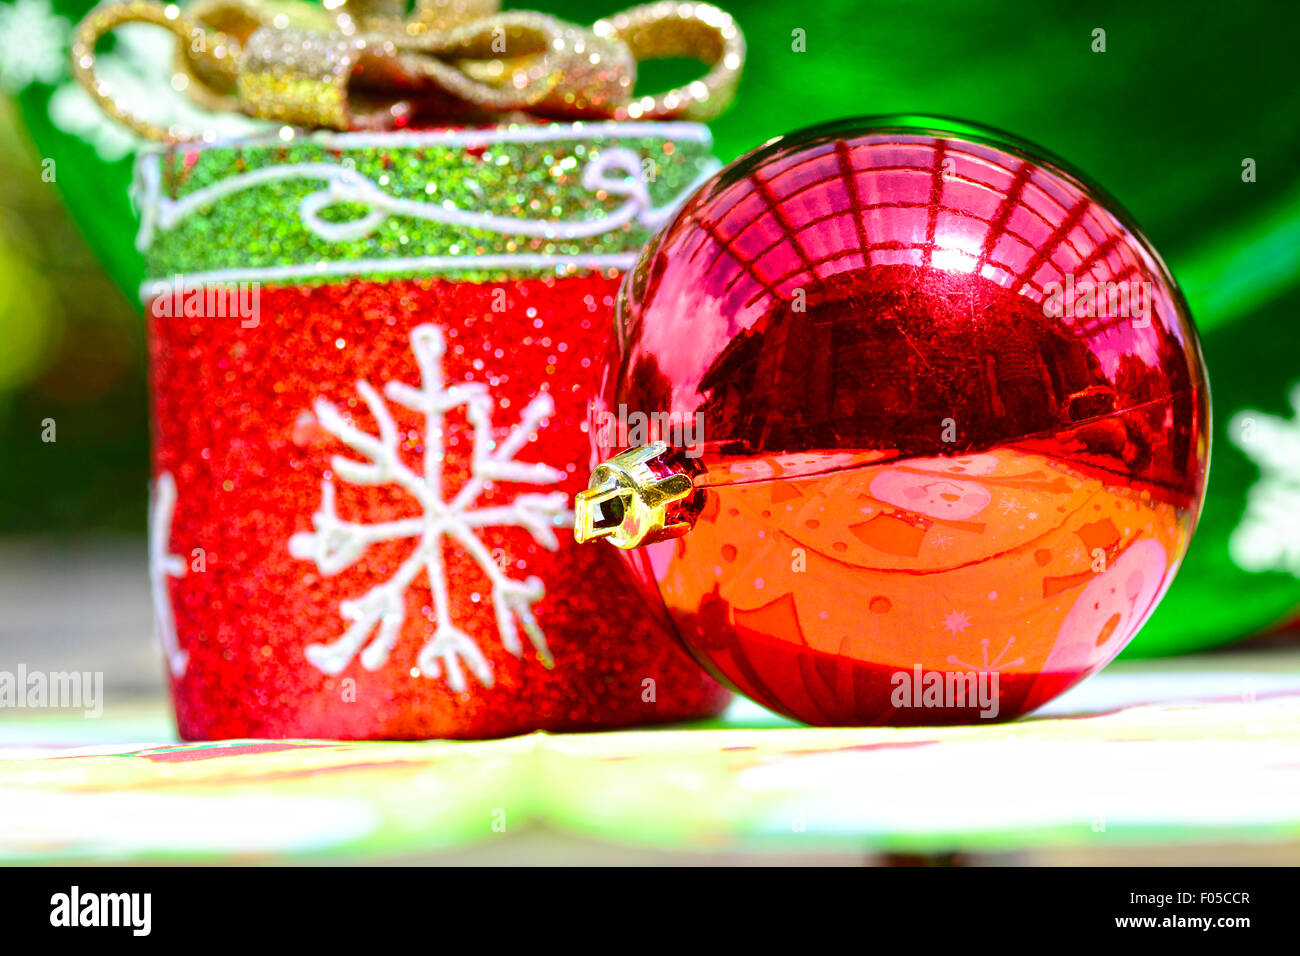 Red christmas ball together with other holiday decorations Stock Photo